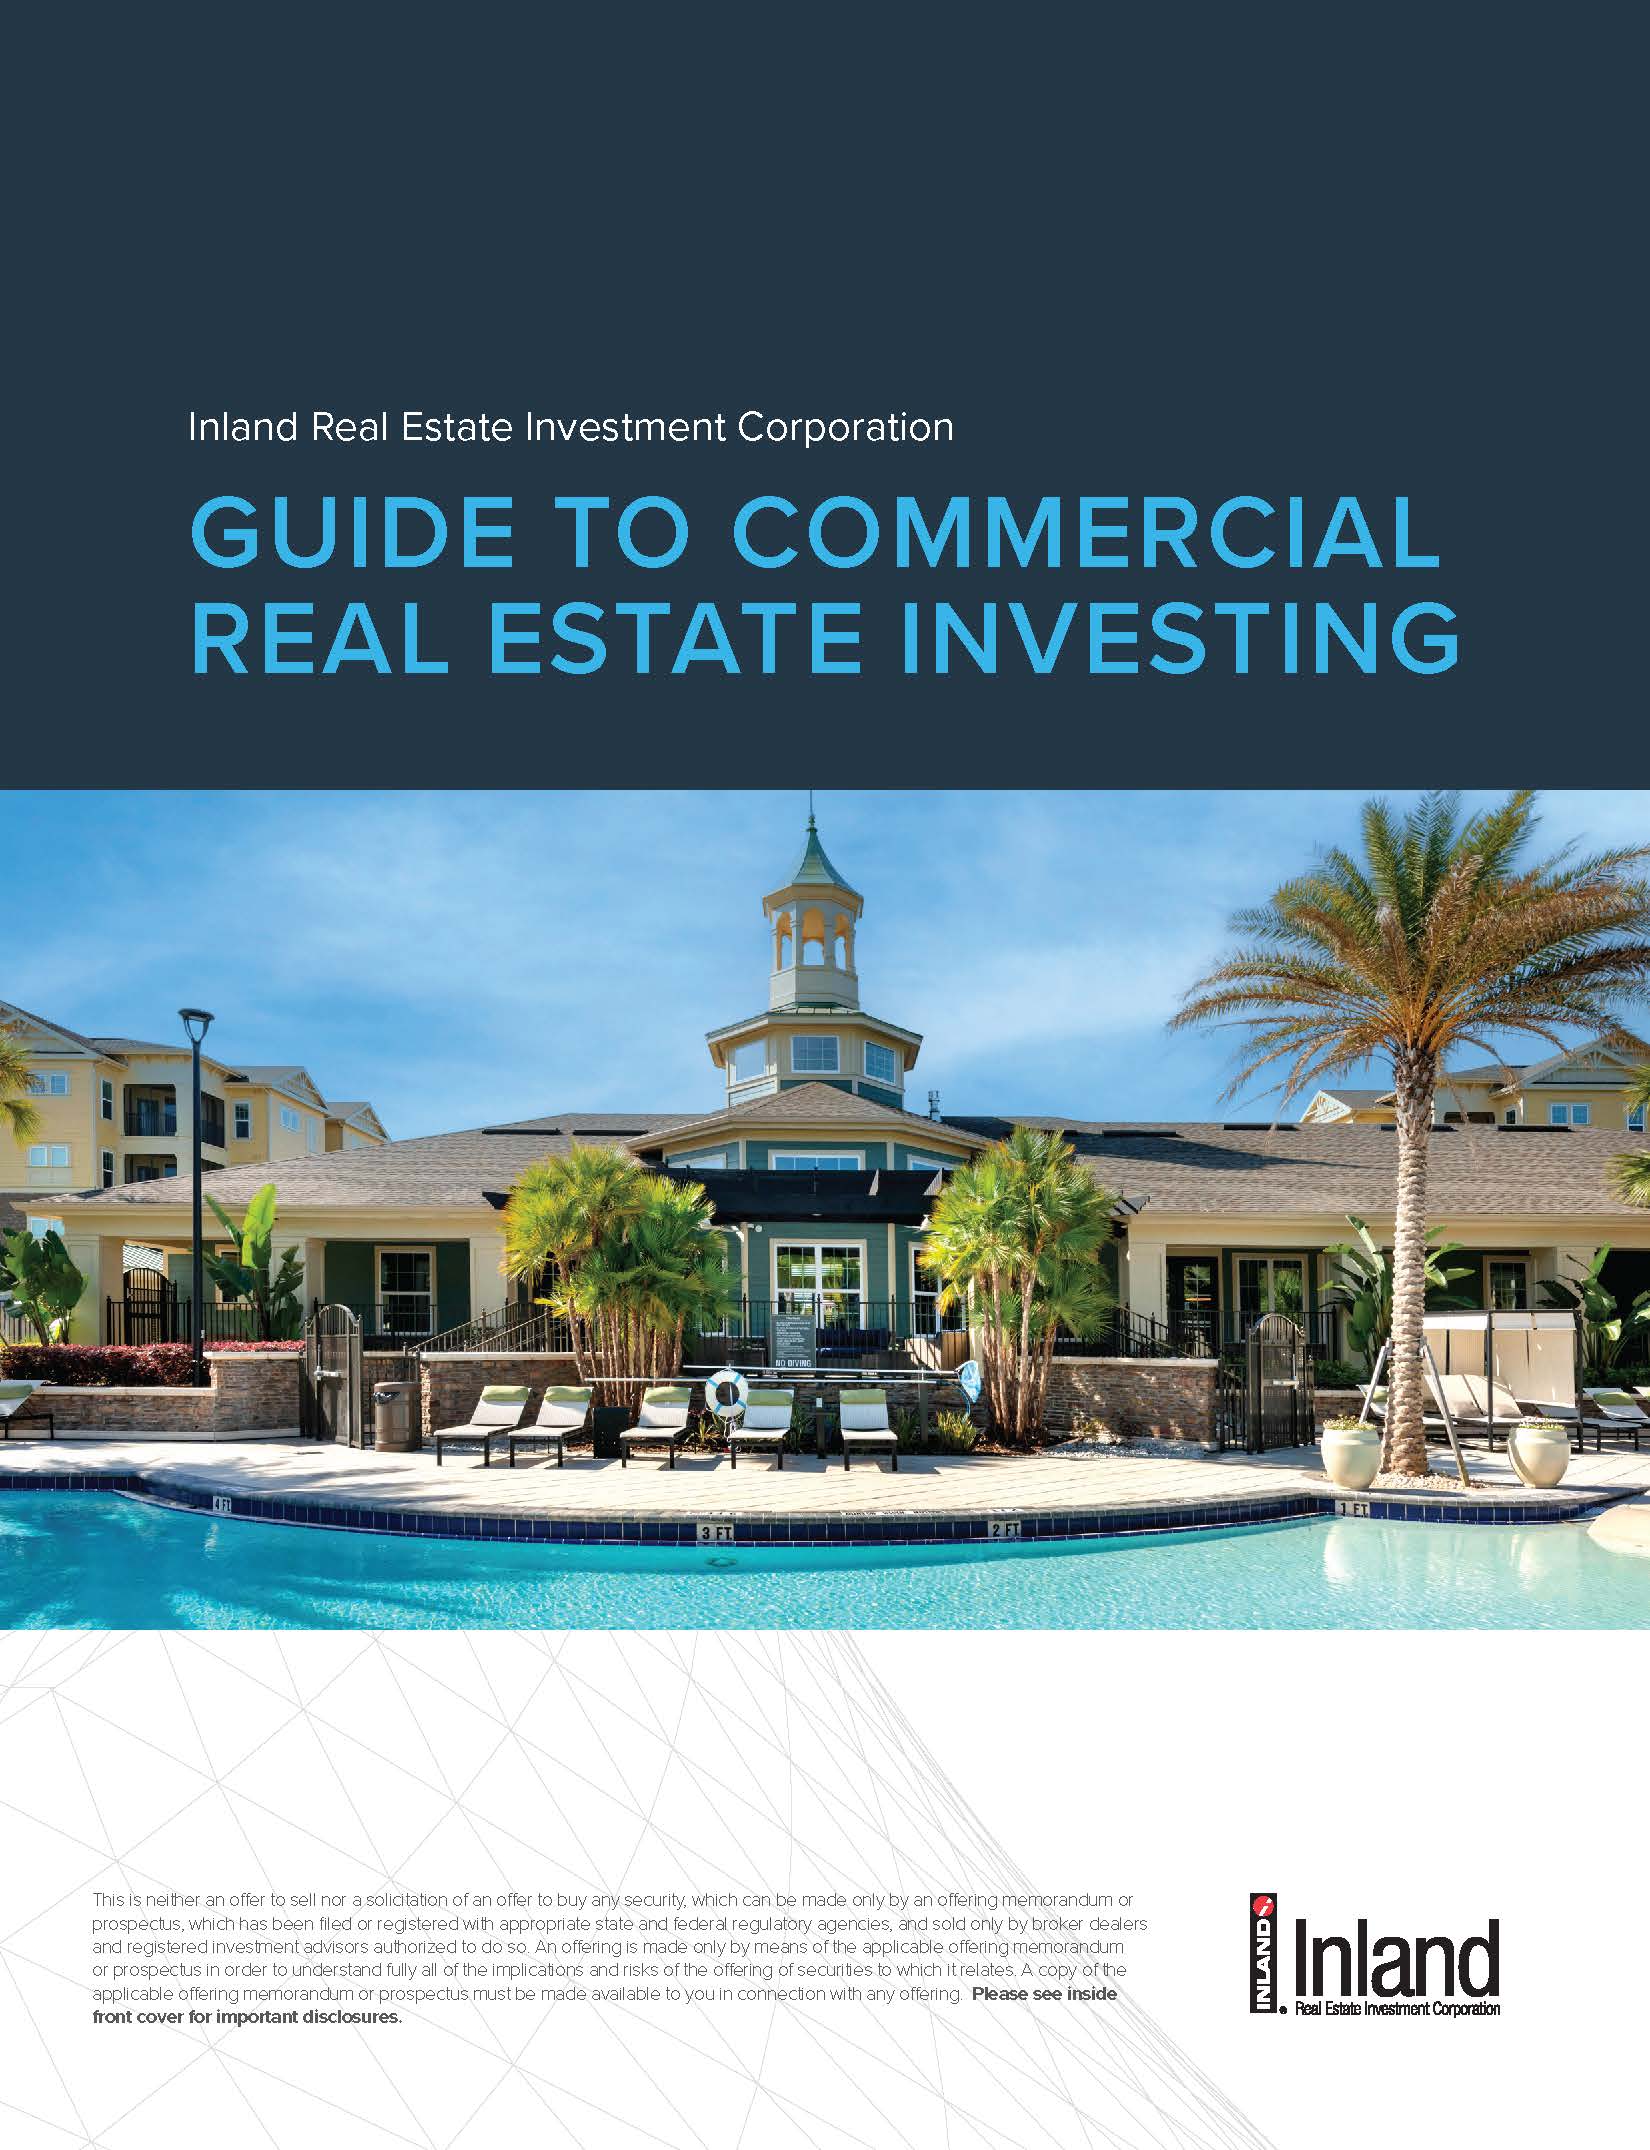 Guide to Commercial Real Estate Investing